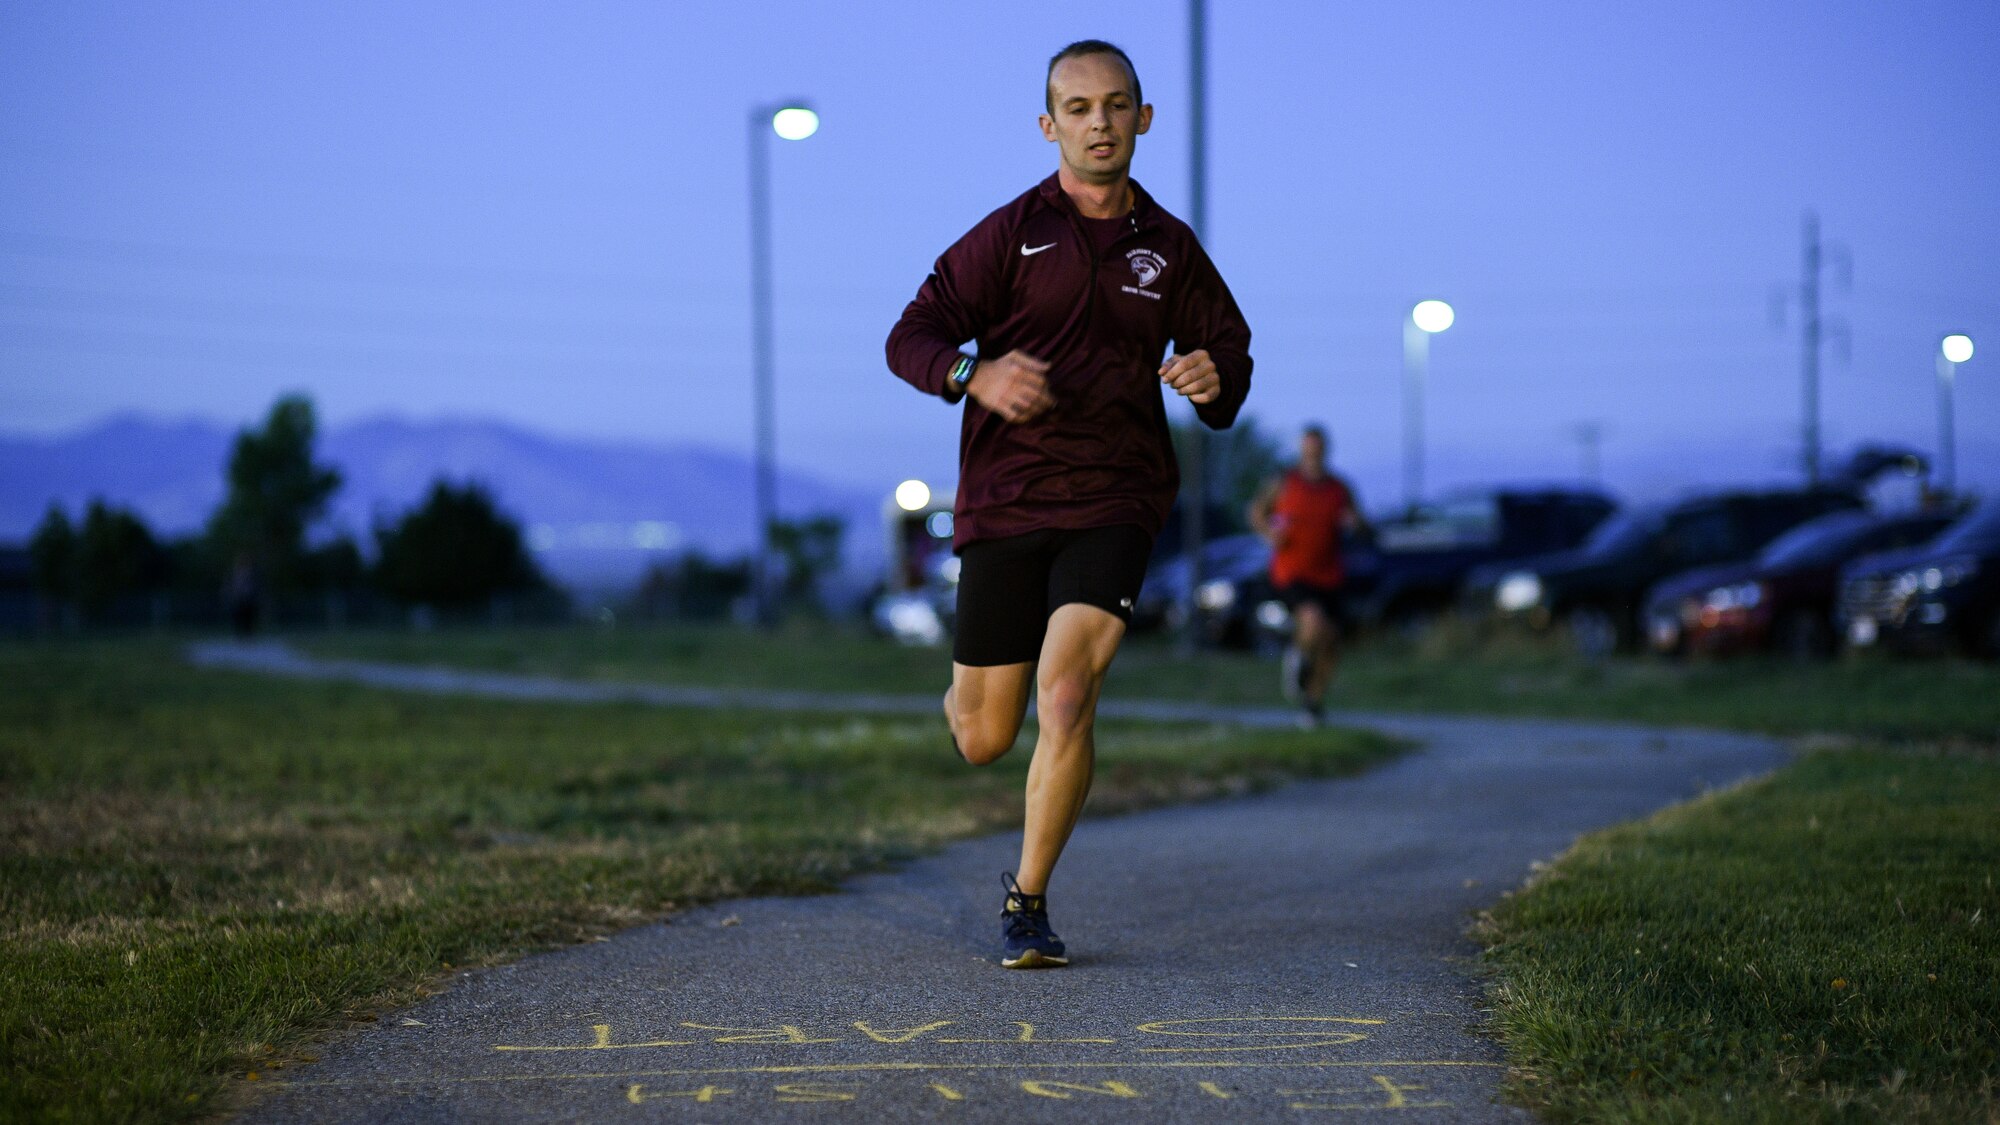 A runner nears the finish line during a Suicide Prevention Month 5K ruck march/run at Hill Air Force Base, Utah, Sept. 25, 2019. (U.S. Air Force photo by R. Nial Bradshaw)